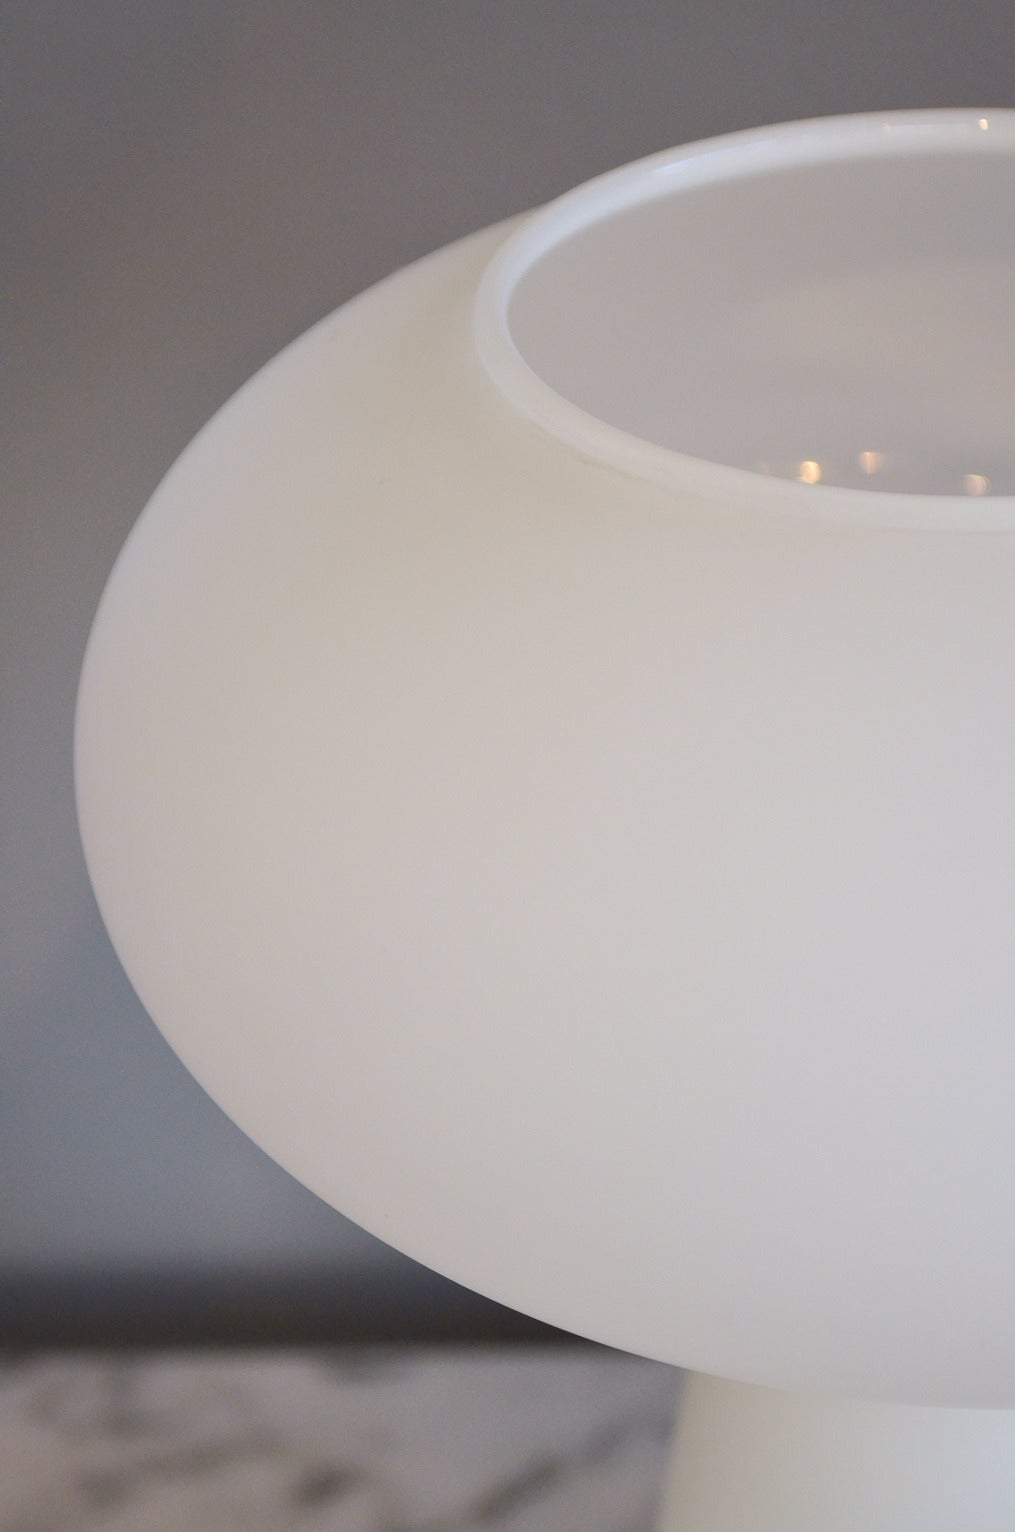 A stunning table lamp designed by Lisa Johansson-Pape of Finland in 1960. Beautiful frosted opaque glass in a lovely soft mushroom shape. Emits beautiful soft light, looks amazing on your desk or side table, nightstand or anywhere you need a little